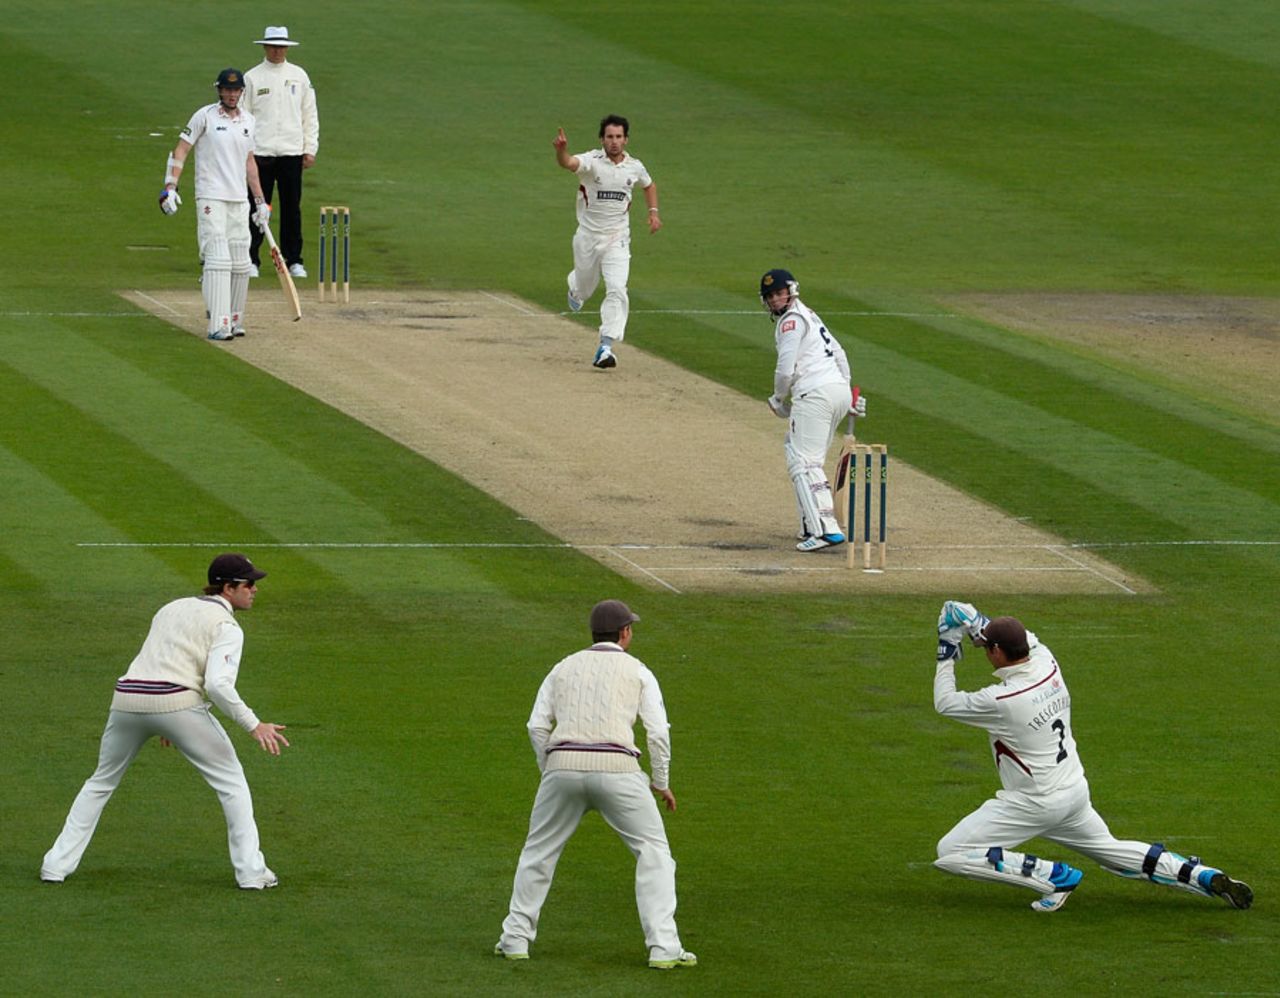 Marcus Trescothick filled in as Somerset's wicketkeeper, Sussex v Somerset, County Championship, Division One, Hove, 3rd day, April 29, 2014